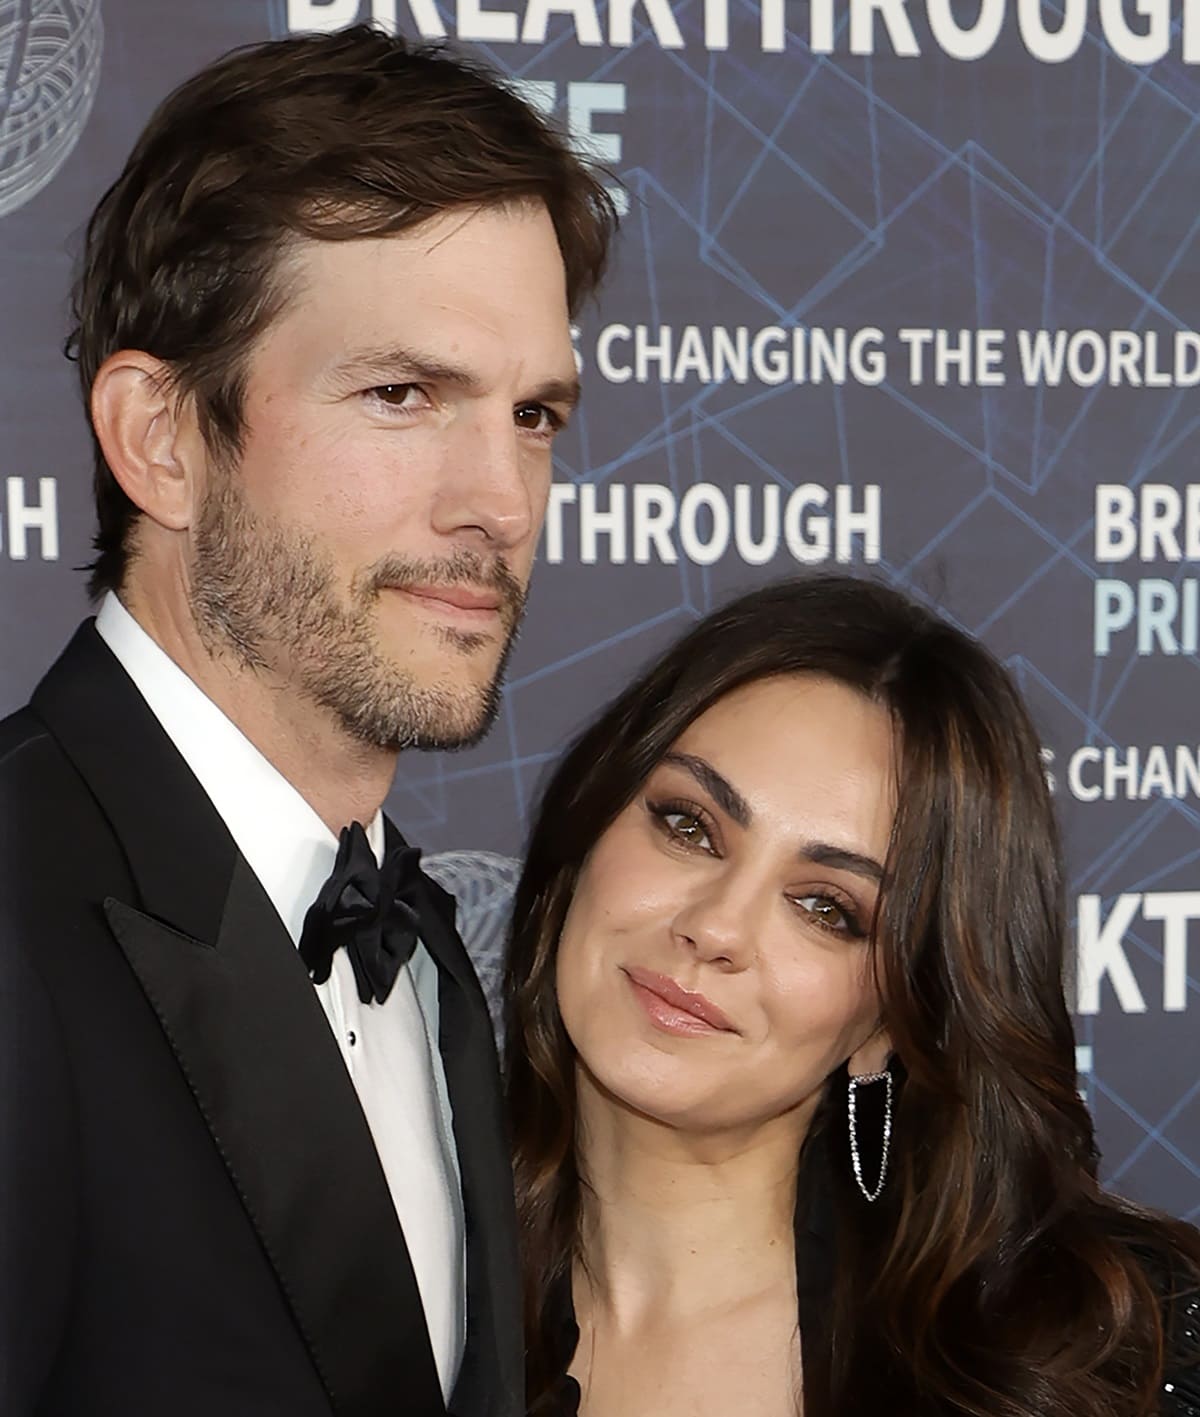 Ashton Kutcher's nonprofit organization Thorn: Digital Defenders of Children has helped identify thousands of child sex trafficking victims and rescued over 100 children, and Mila Kunis has raised over $30 million for Ukrainian refugees